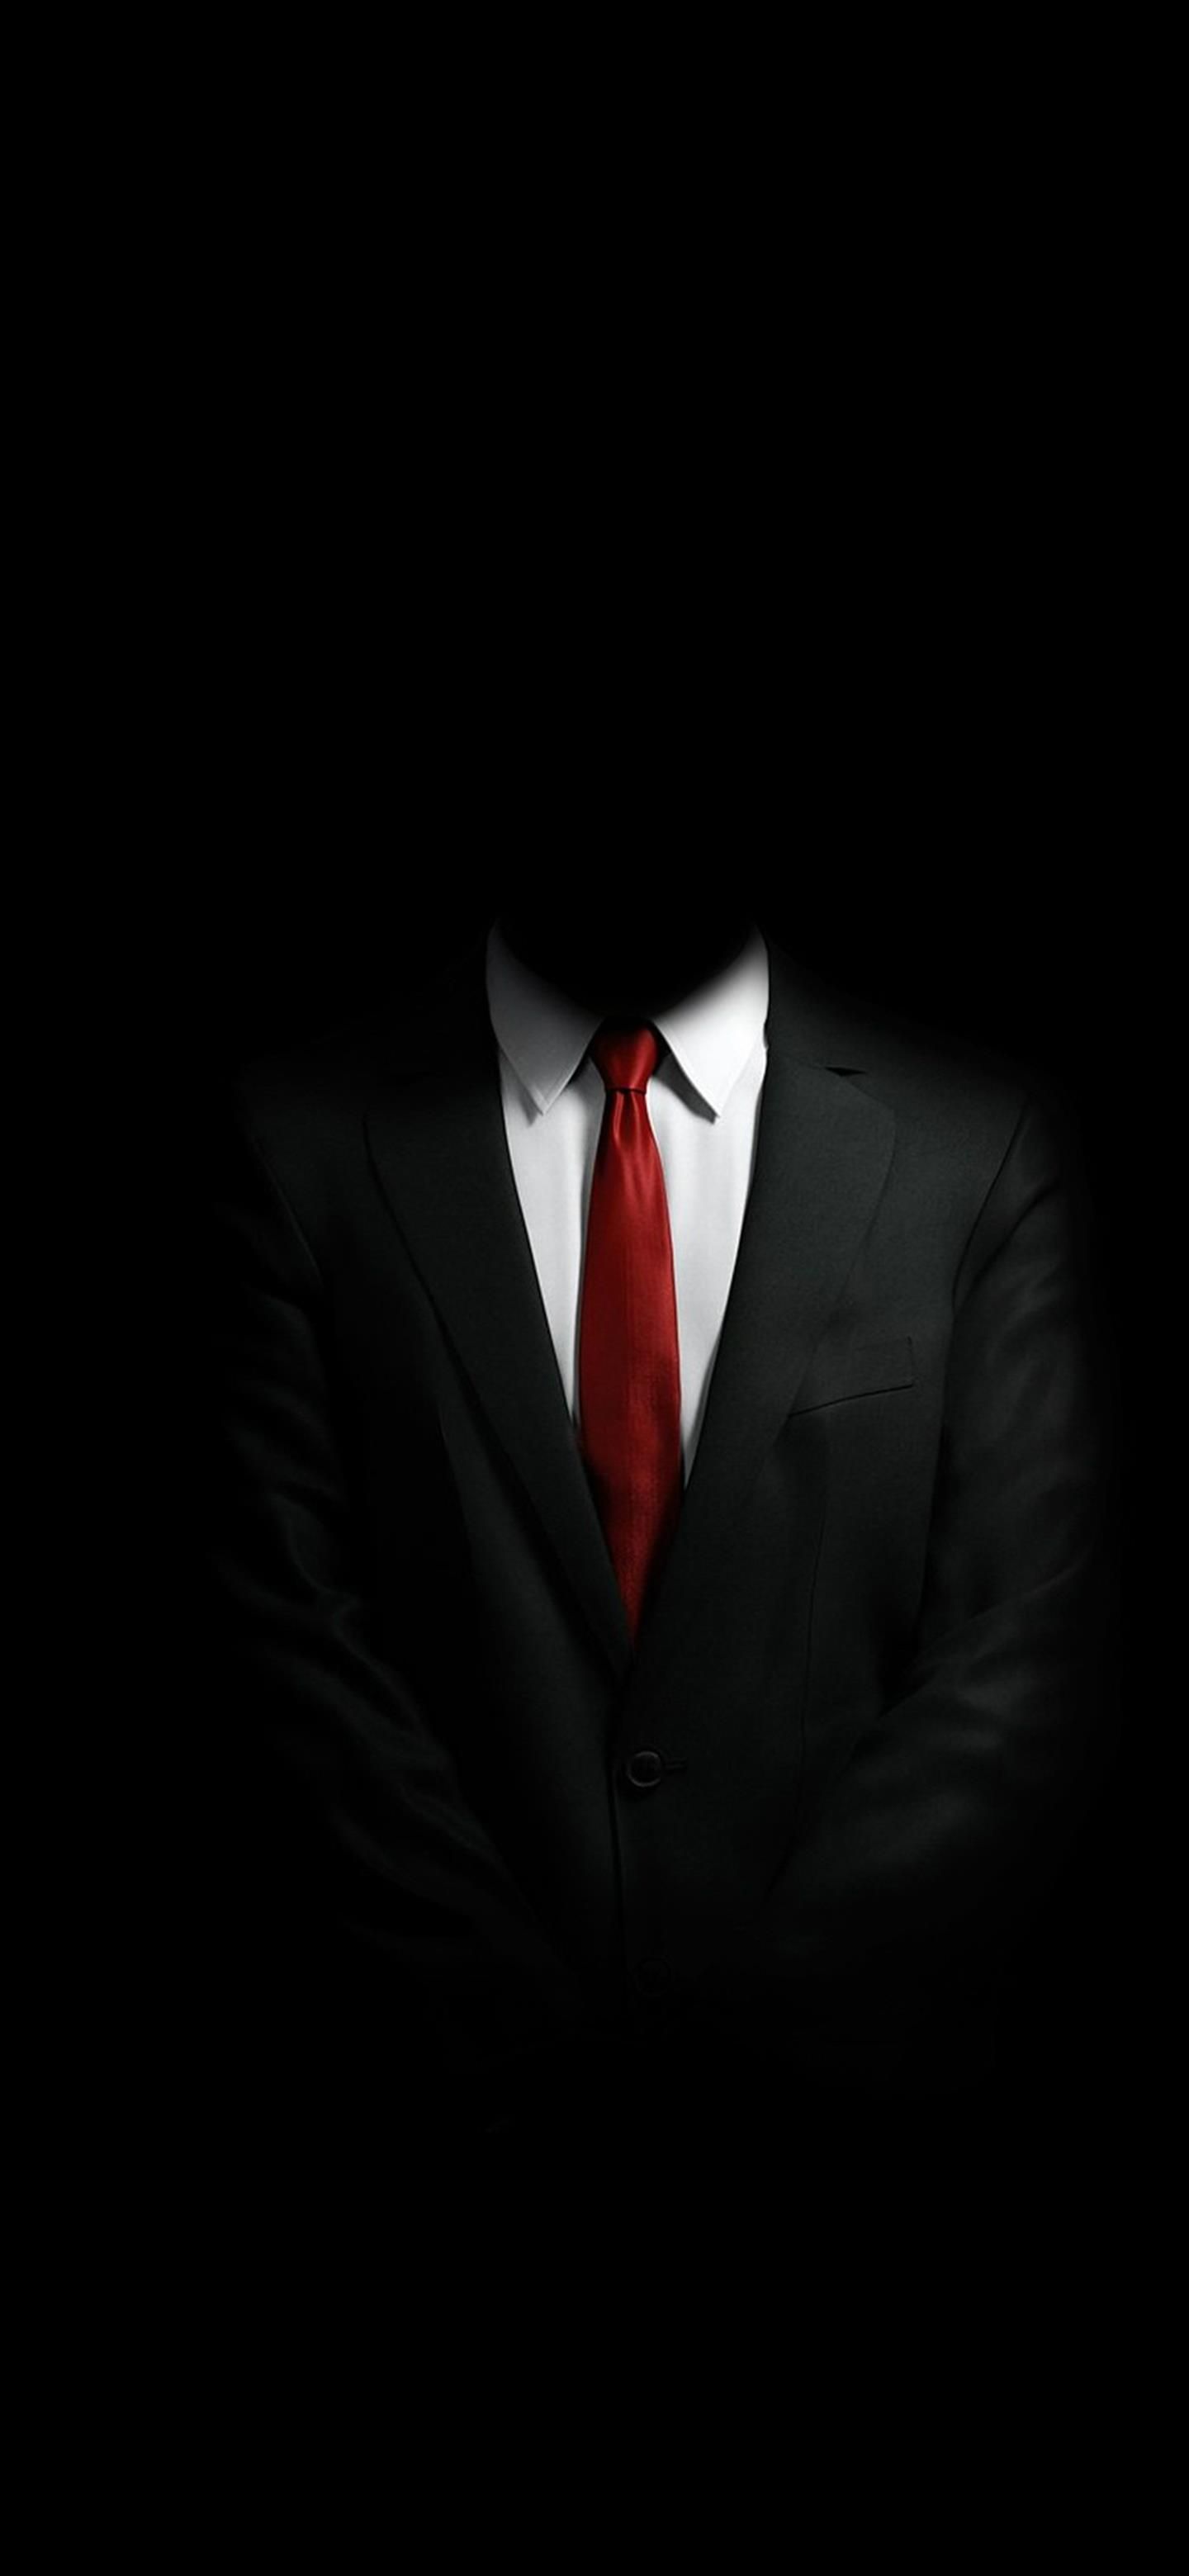 Free download the Mystery Man In Suit wallpaper , beaty your phone. #abstract #suit #man #Locks. Phone wallpaper for men, Phone wallpaper, Android phone wallpaper